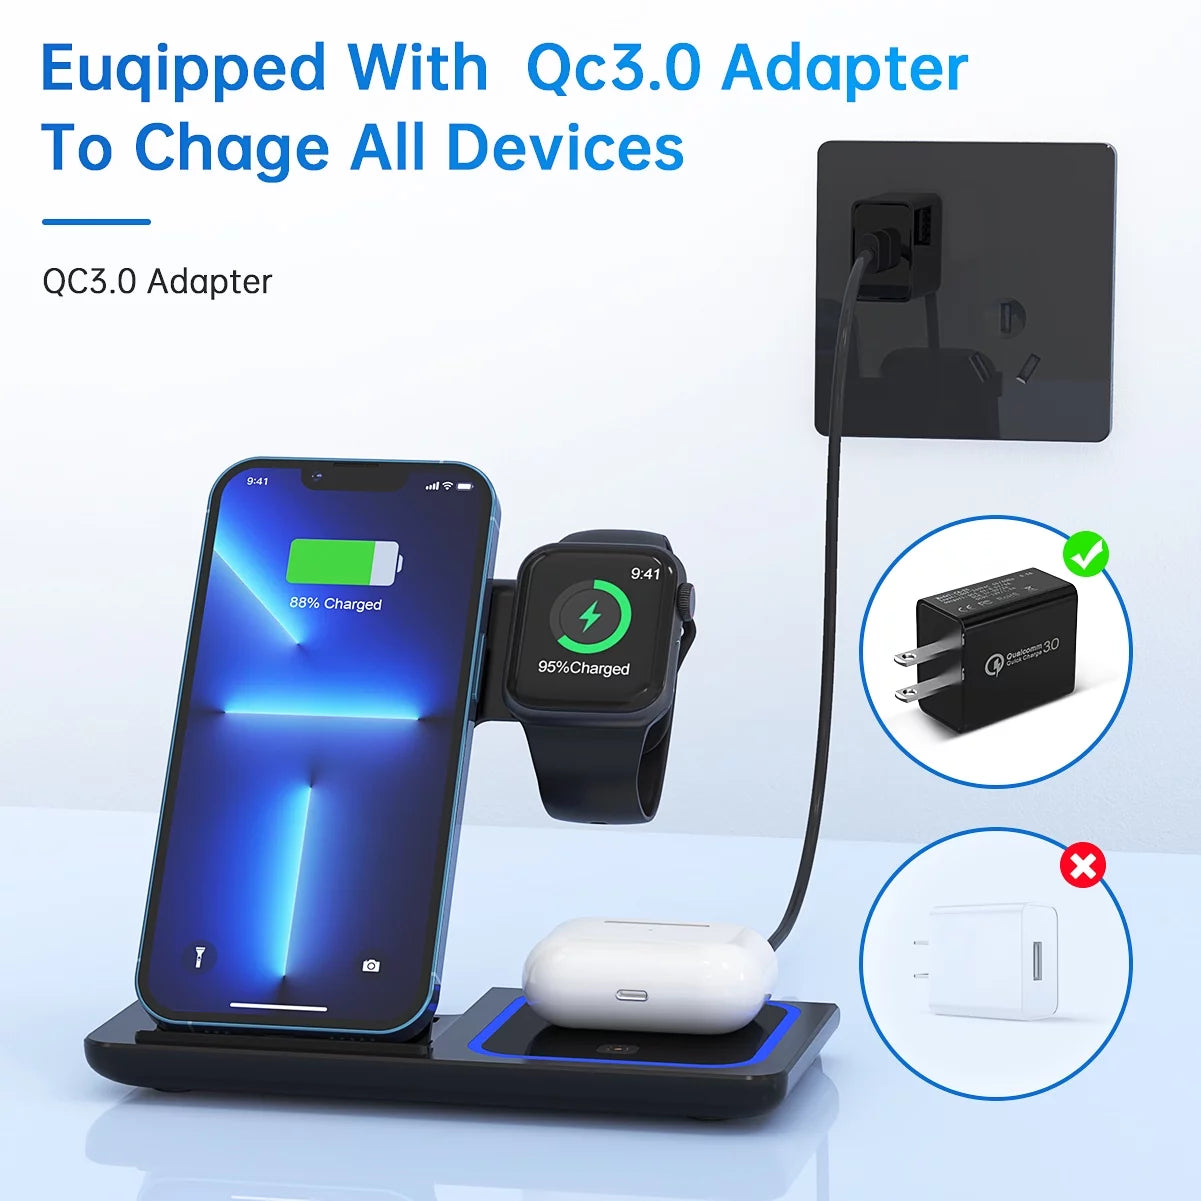 Wireless Charging Station with Fast 18W Charger for iPhone, Apple Watch, and AirPods - Compatible with Various Models